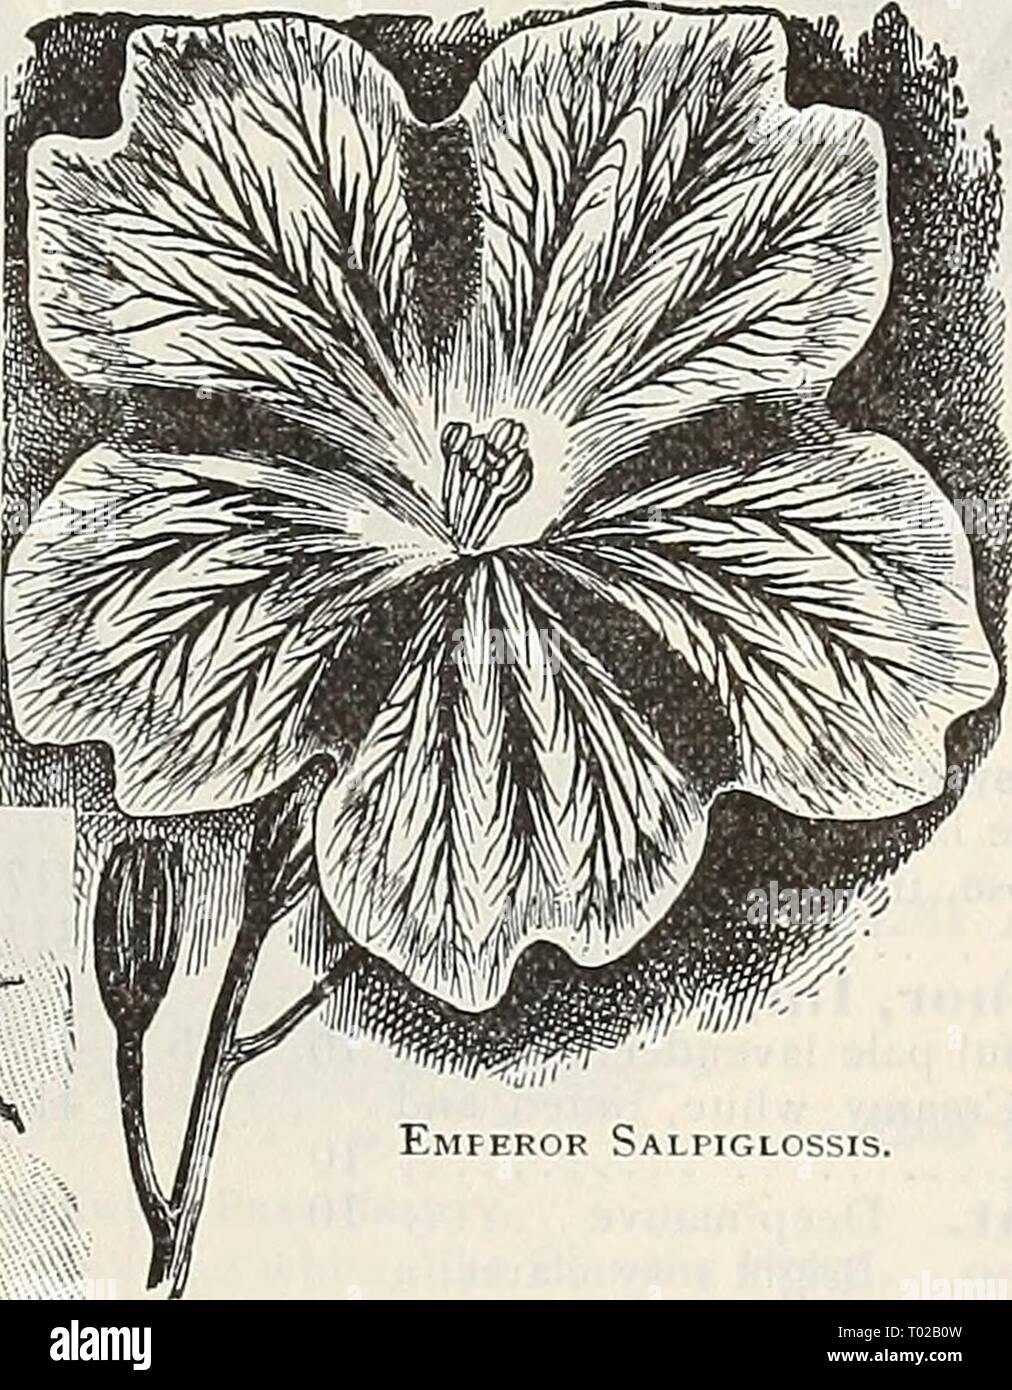 Dreer's garden calendar : 1900 . dreersgardencale1900henr Year: 1900  Salpig^lossis. Emperor Salpiglossis. bUEEl bCABlcJLb (Painted Tongue.) The Salpiglossis is one of the greatest favorites among annuals, partly be- cause of its easy culture, but principally for its beautiful, almost orchid-like flowers, ^ which it pioduces from early [summer until late fall. PER PKT. 3920 Large Flower- ing-'Mixed. A splendid variety of colors, flowers of good size 5 3921 Emperor. 1 his new variety forms only one leading stem, and bears on its summit a verit- able bouquet of the most b eau t i fu 1 flowers, e Stock Photo